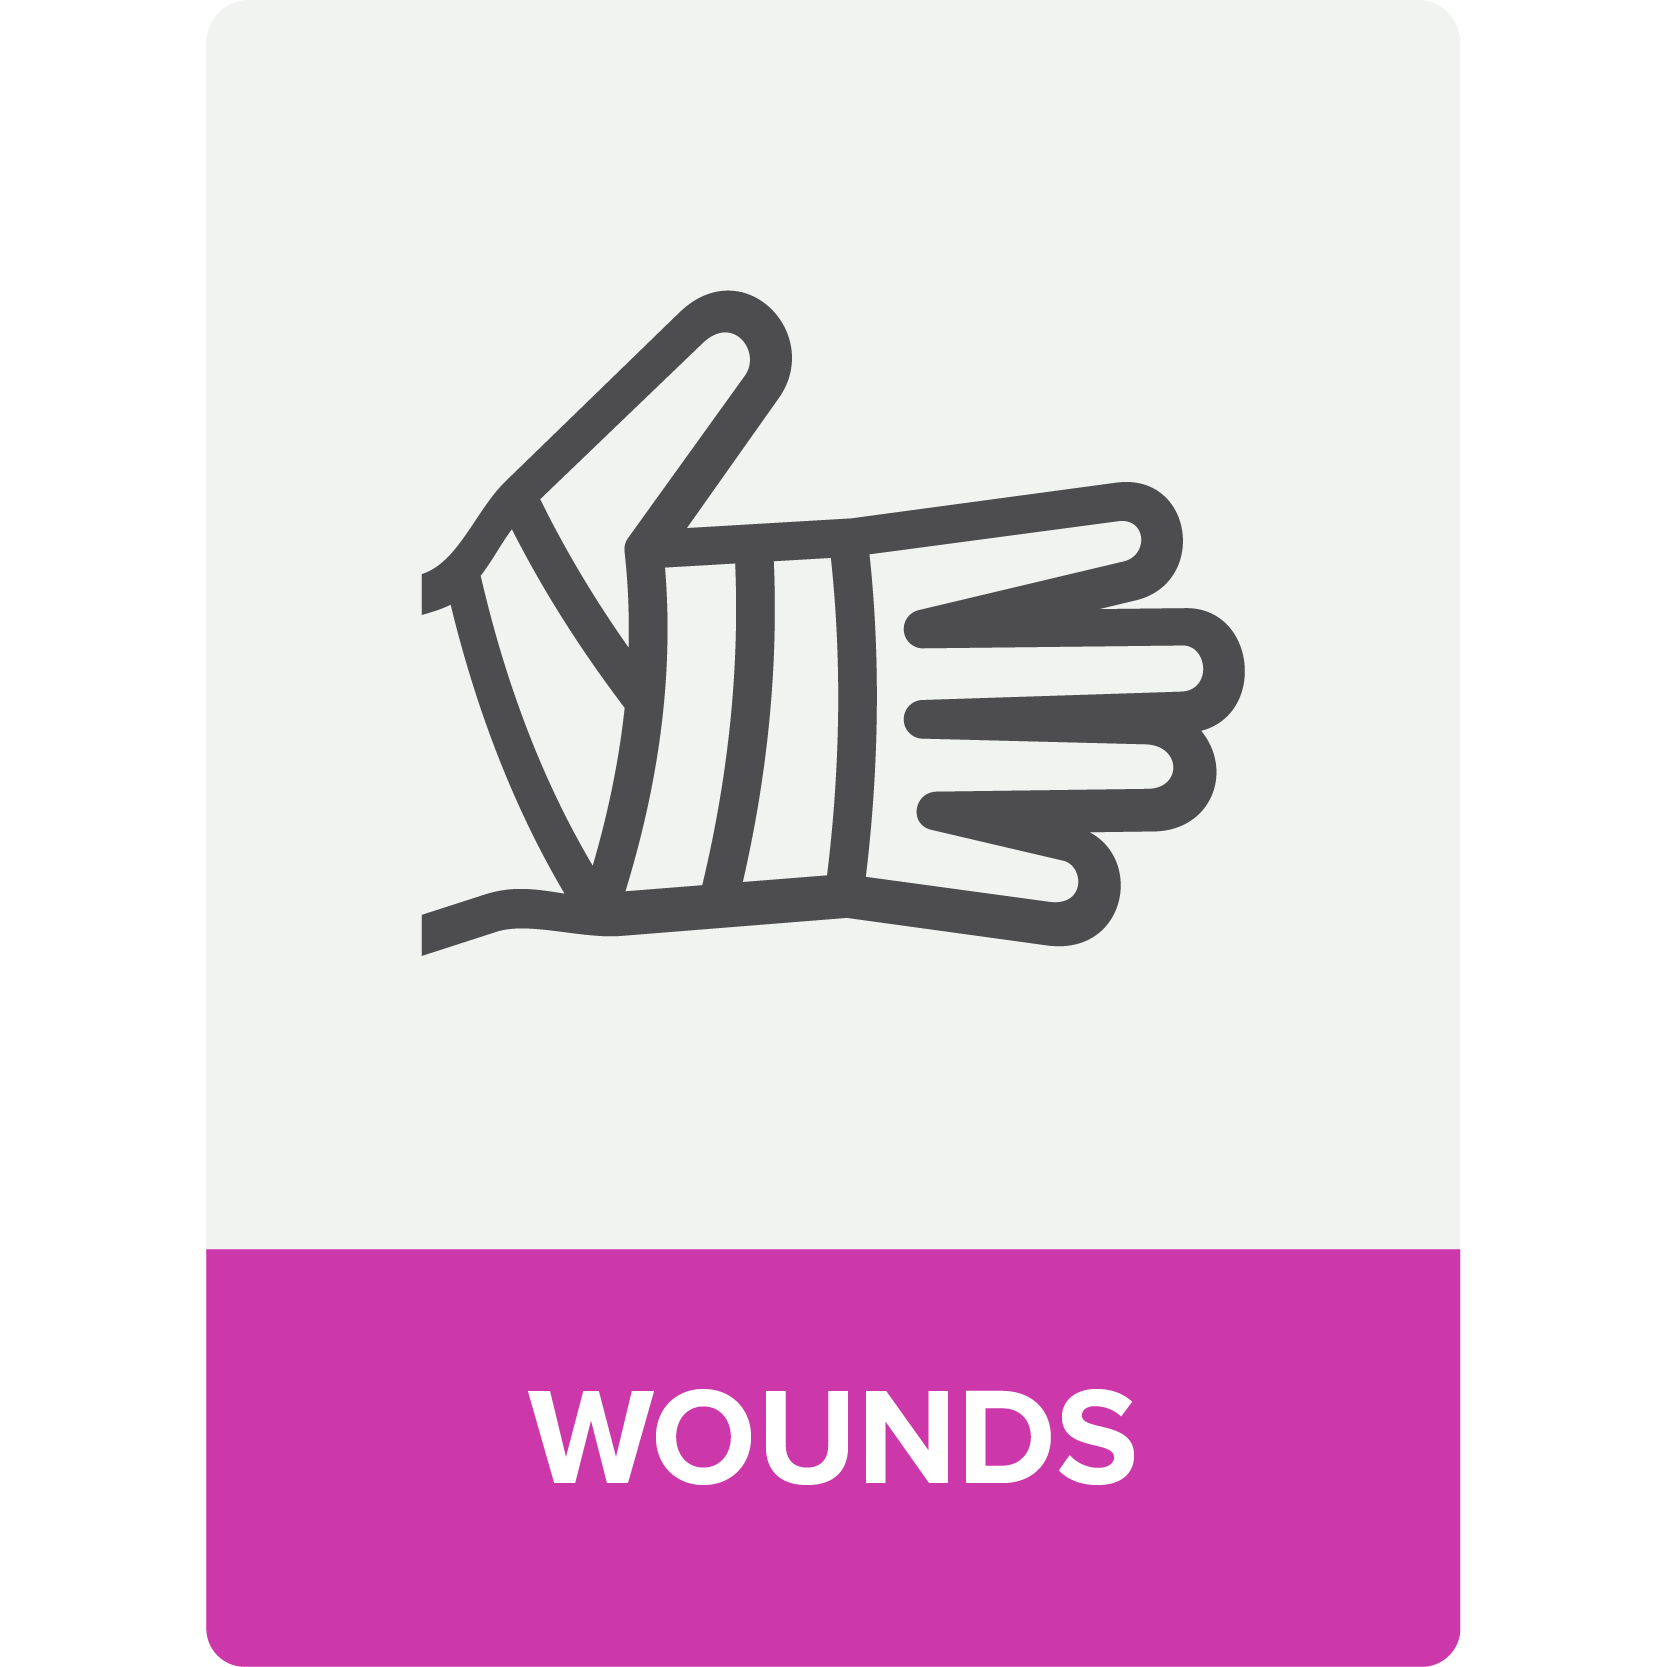 icon of hand wrapped in bandage with the words "wound management" on a purple background below the icon